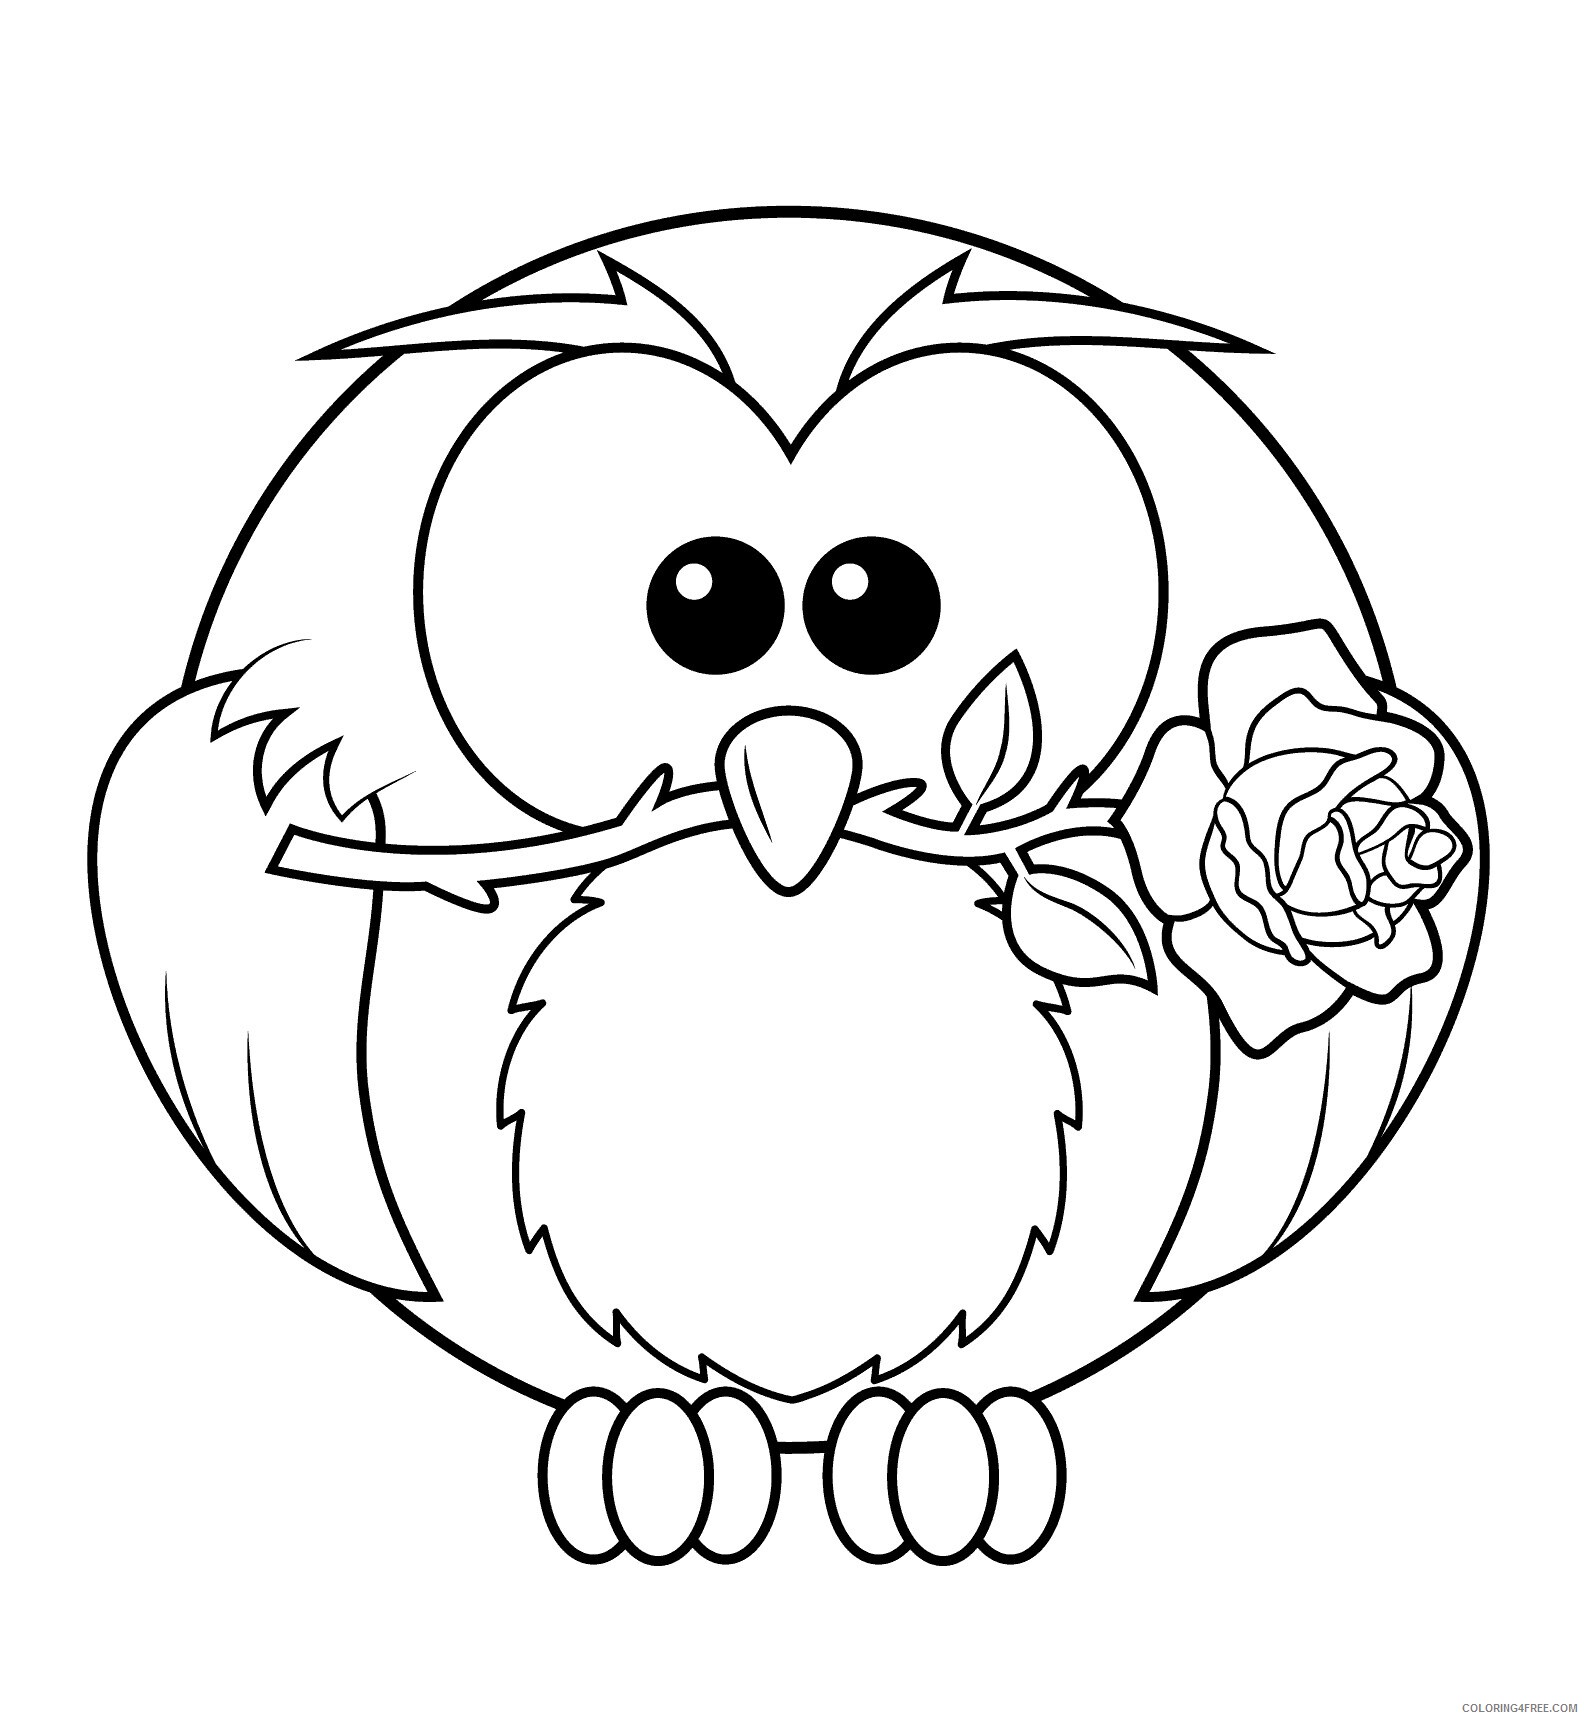 Owl Coloring Pages Animal Printable Sheets owl with rose 2021 3663 Coloring4free